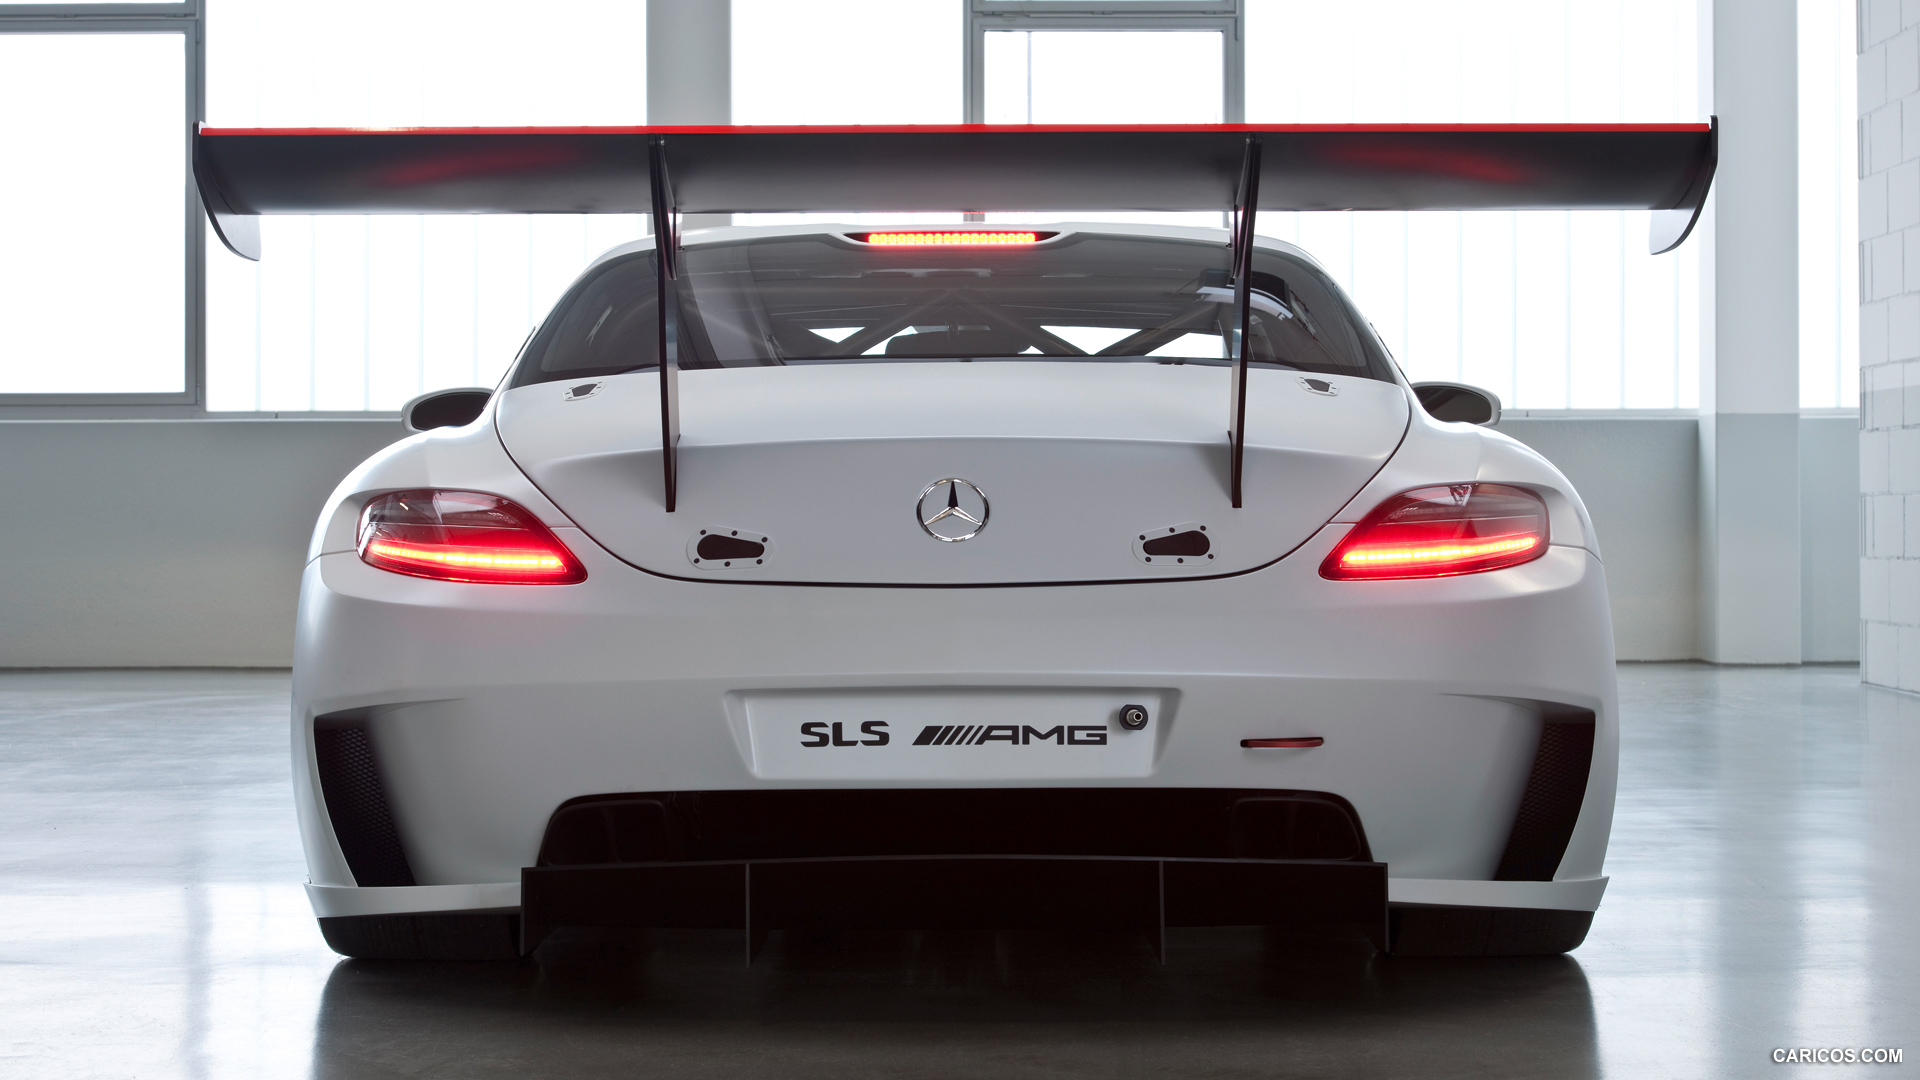 Mercedes-Benz SLS AMG GT3  - Rear Angle View Photo, #26 of 30